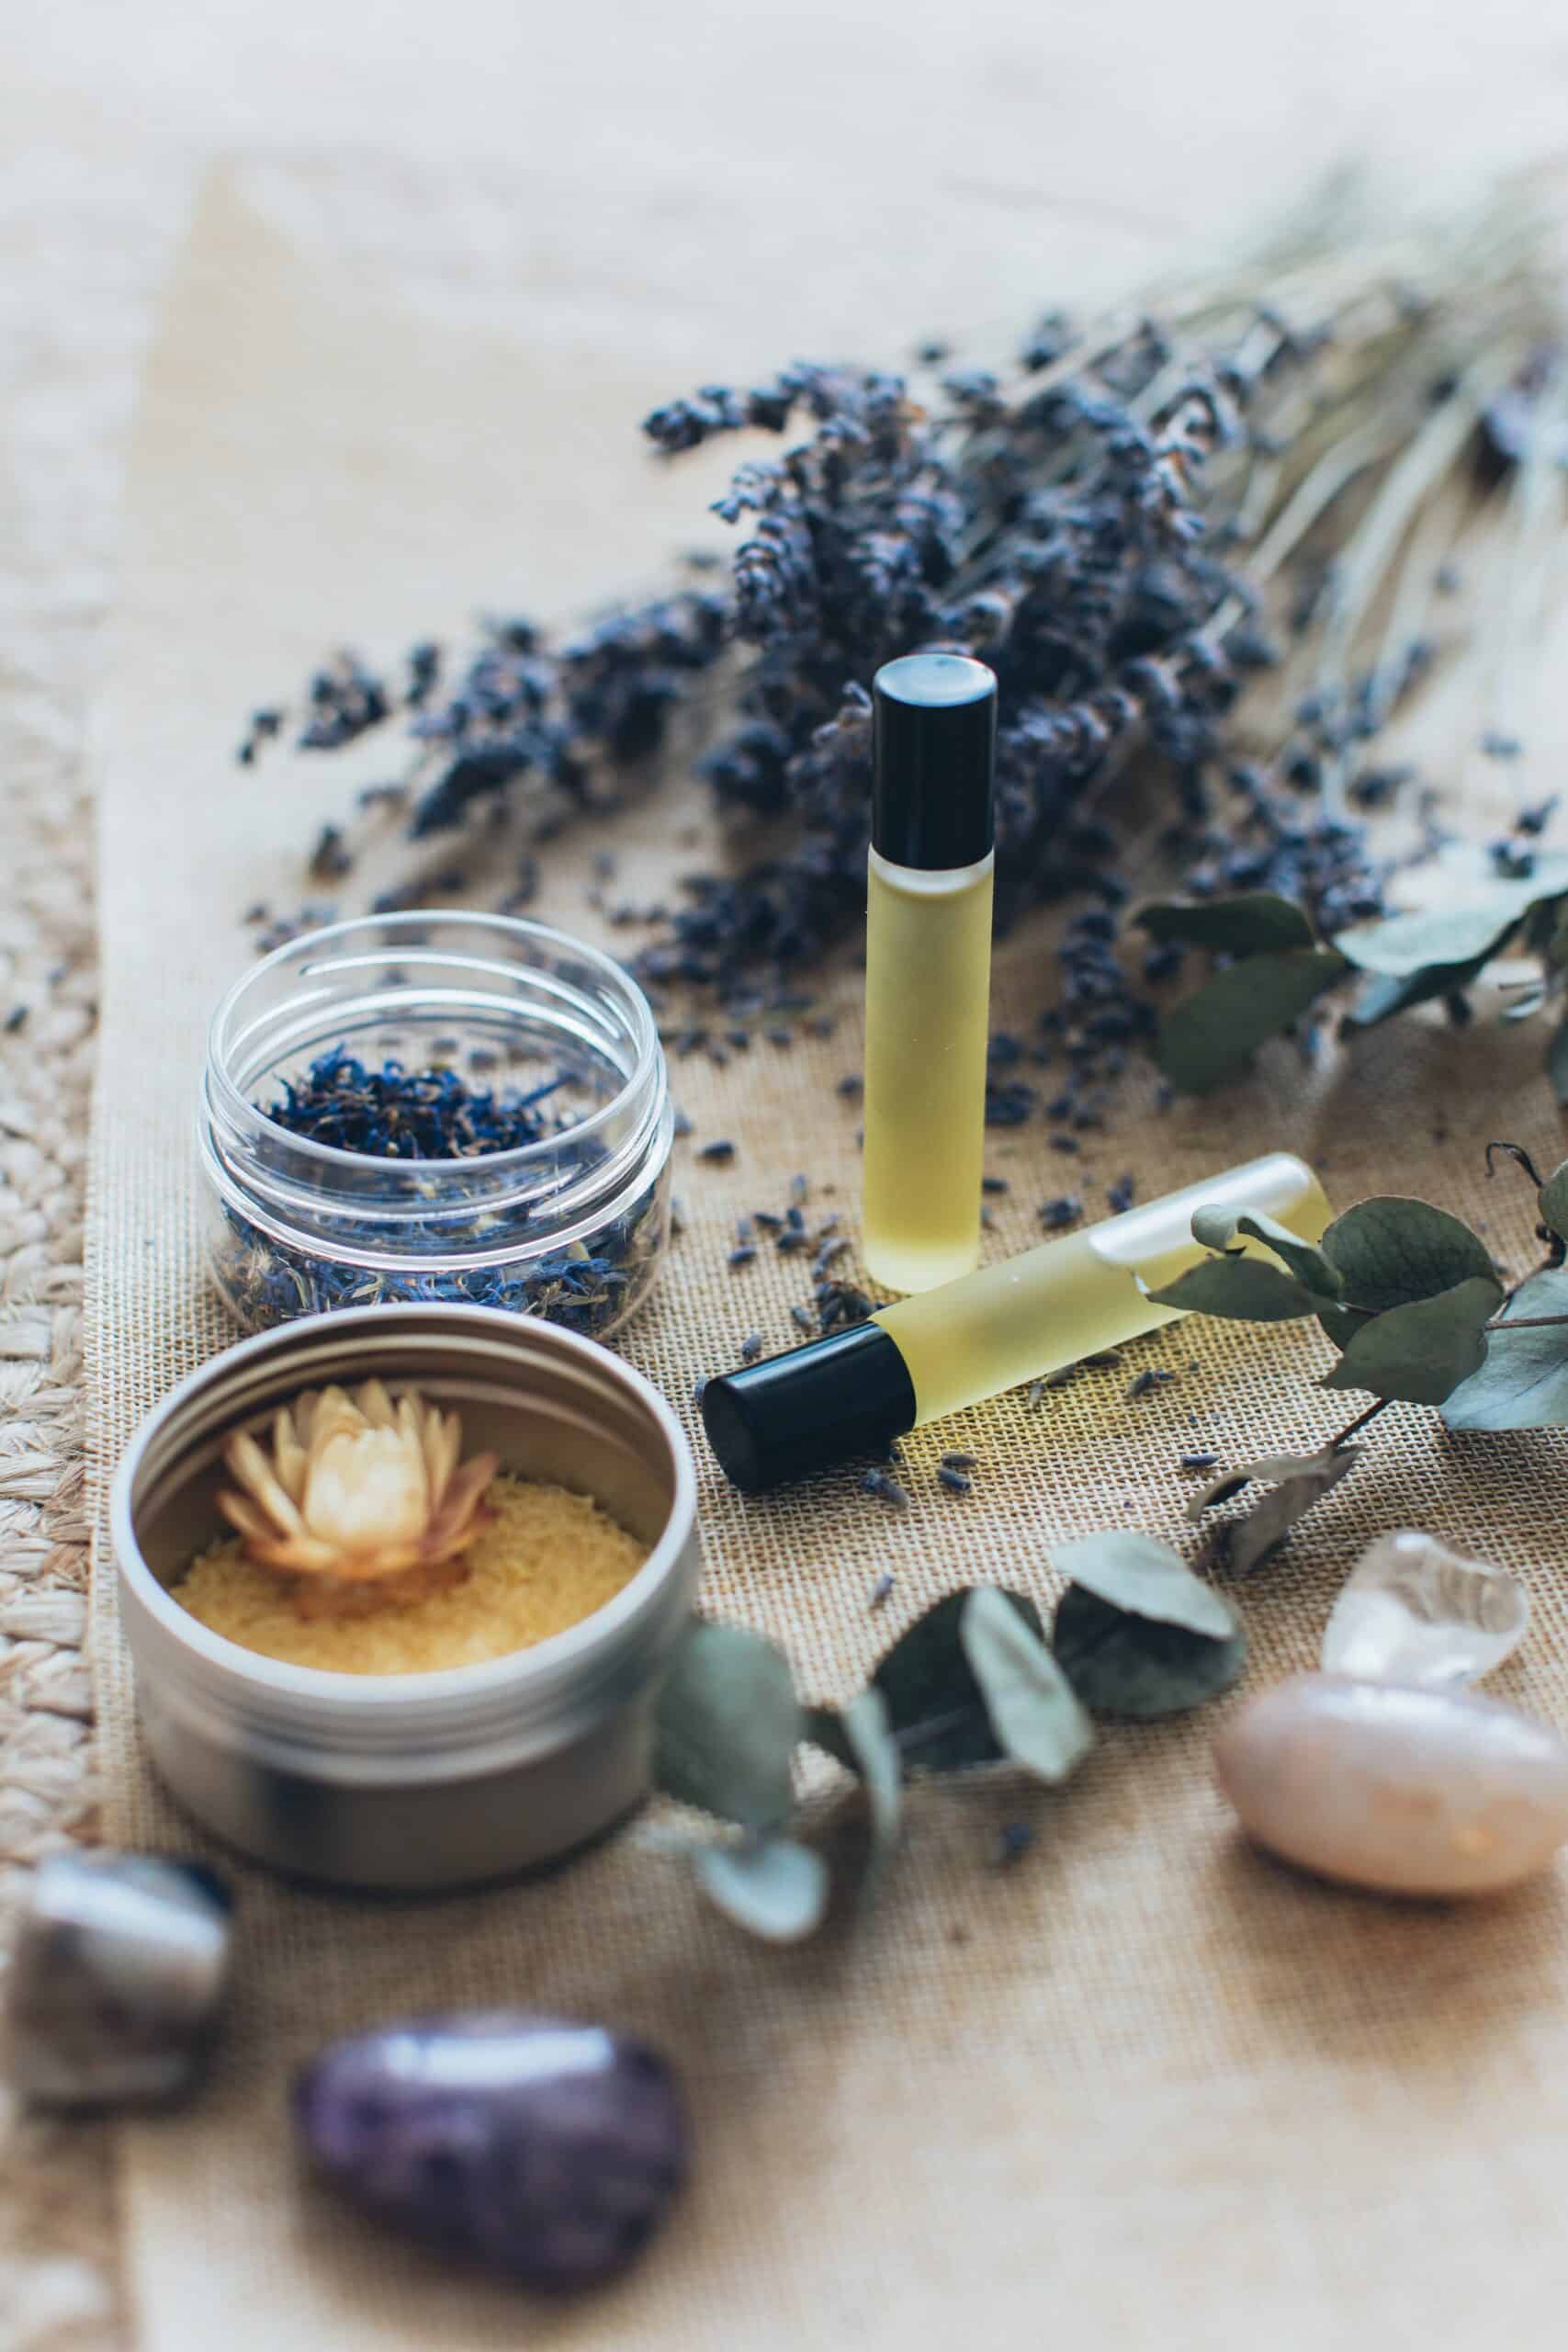 How Essential Oils Promote Physical & Emotional Health